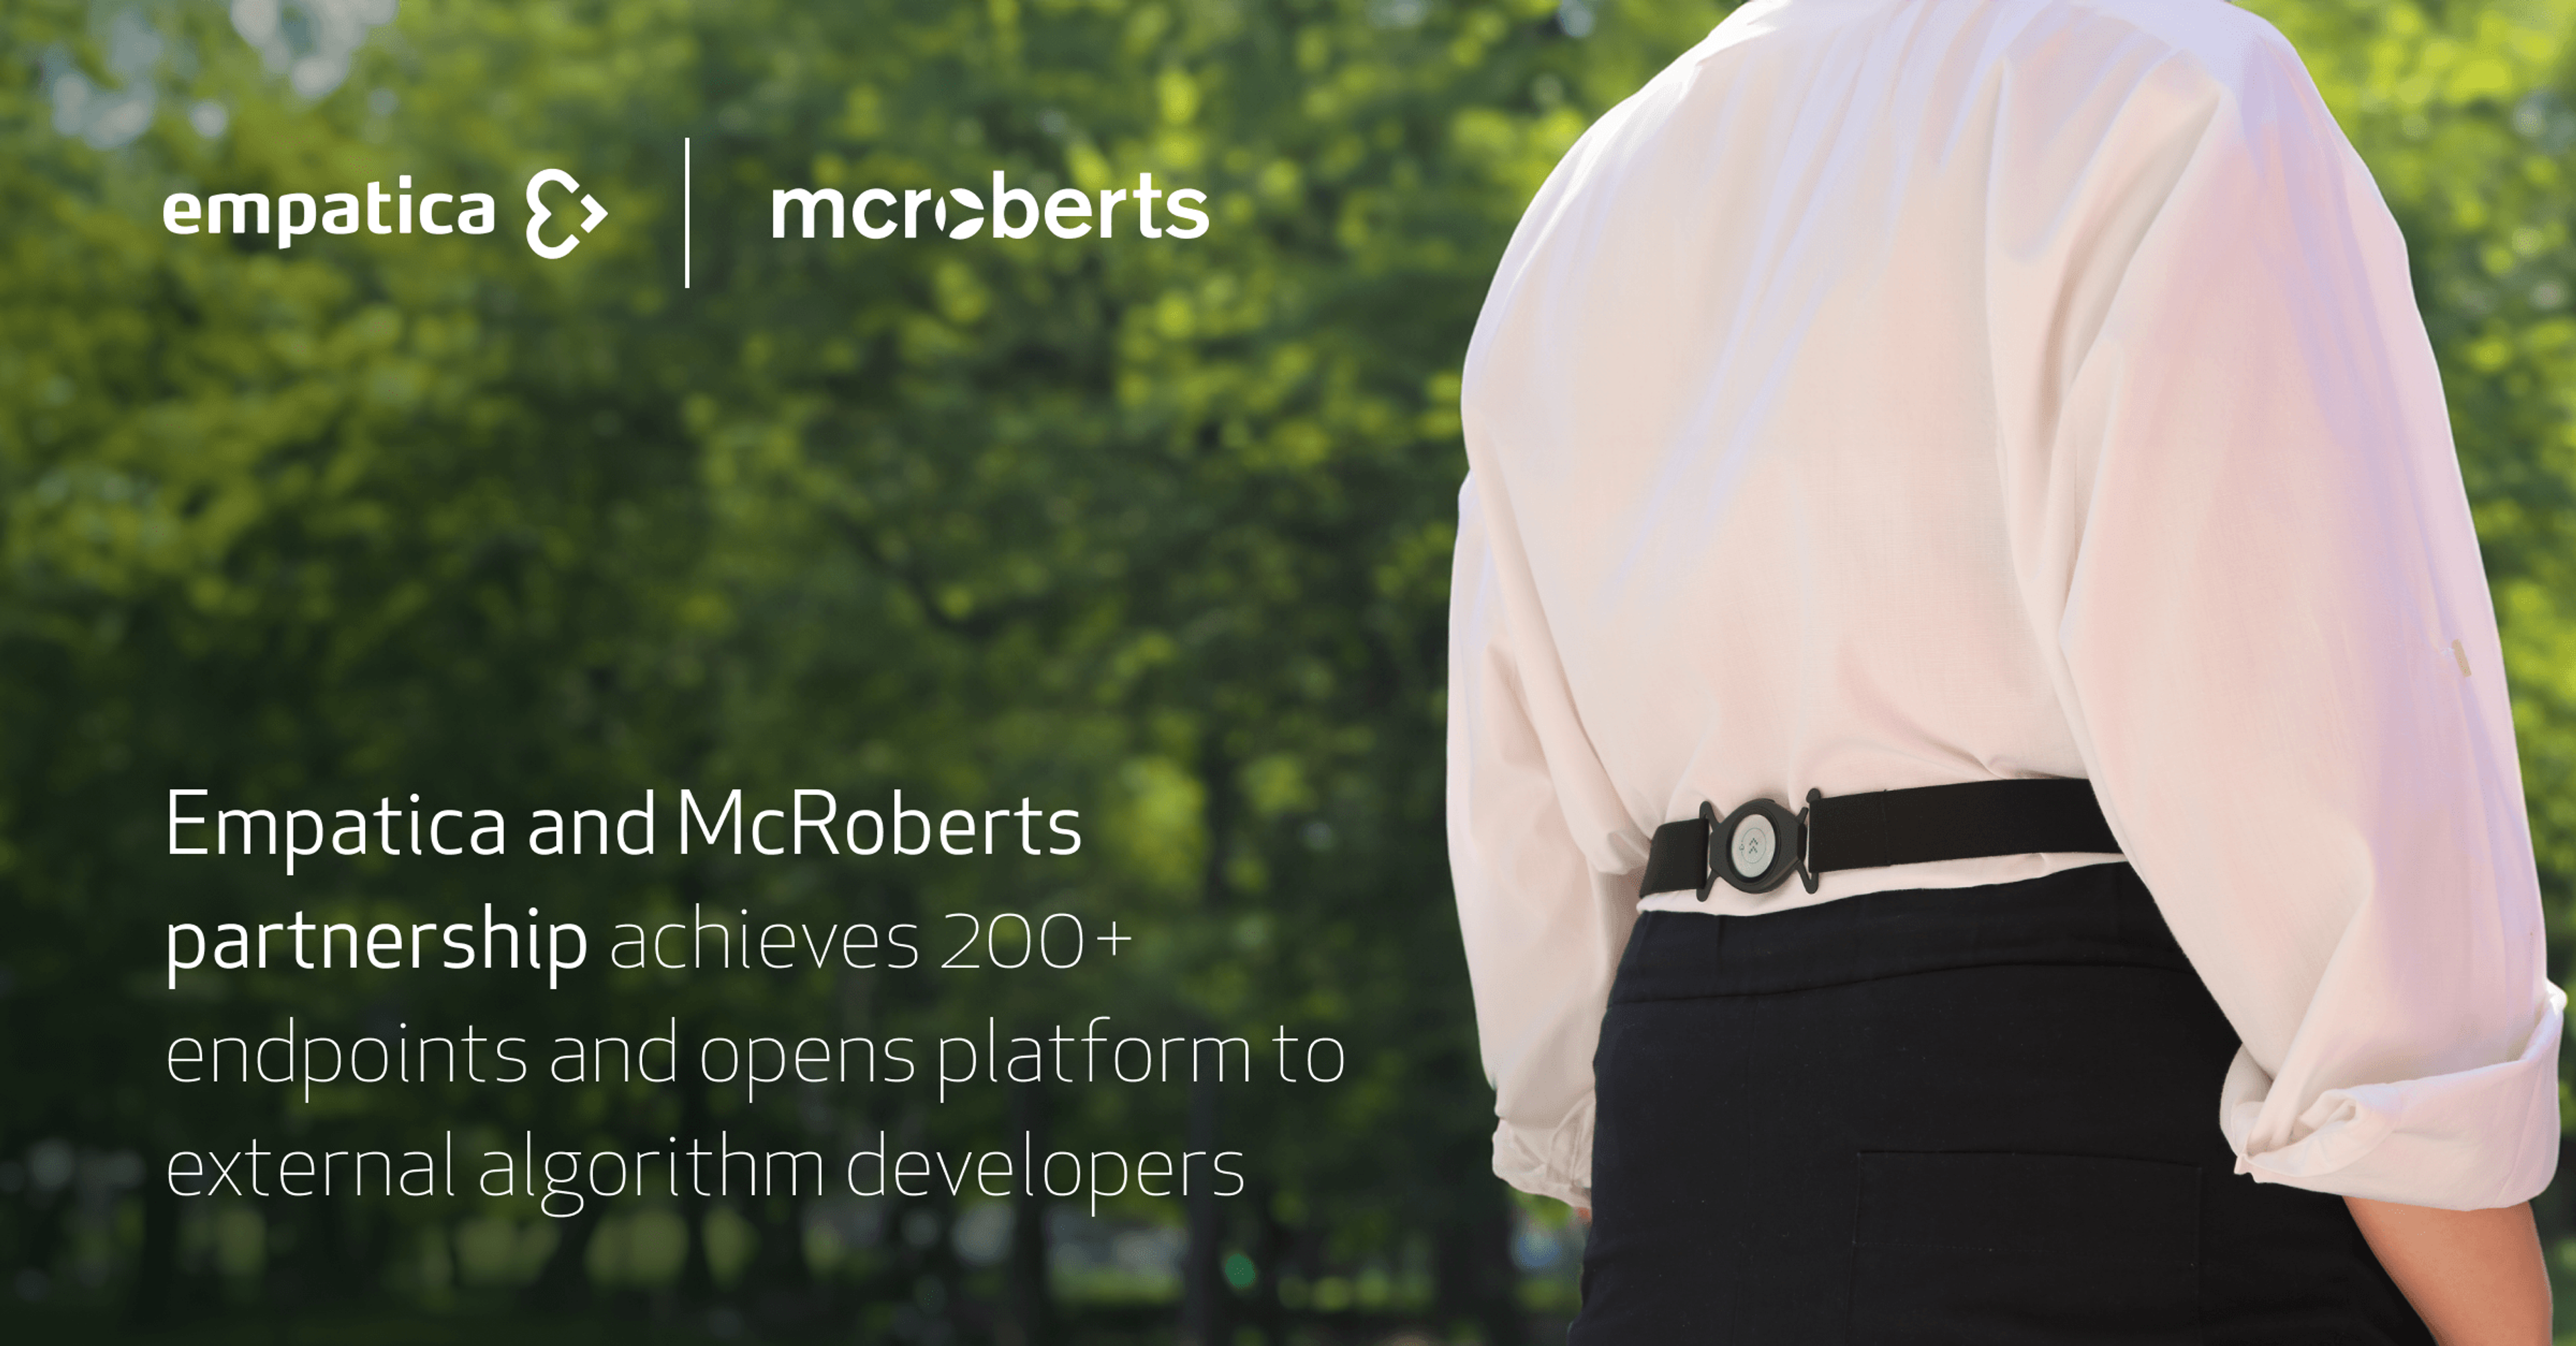 Empatica partners with McRoberts to provide 200+ digital endpoints to researchers through its platform